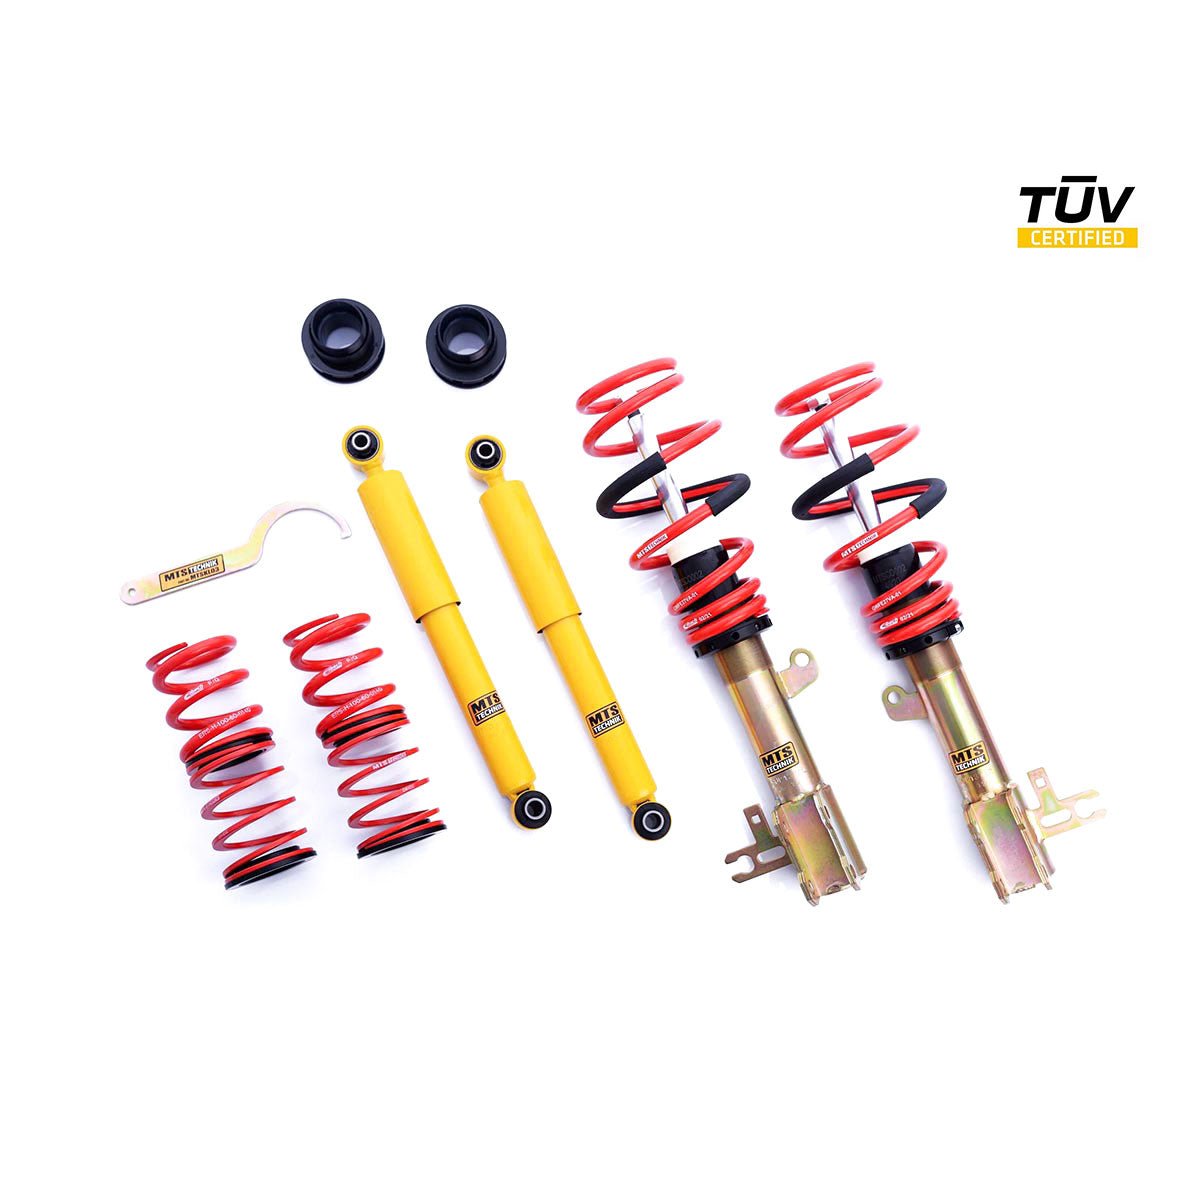 MTS TECHNIK coilover kit SPORT Opel Astra H Hatchback (with TÜV) - PARTS33 GmbH